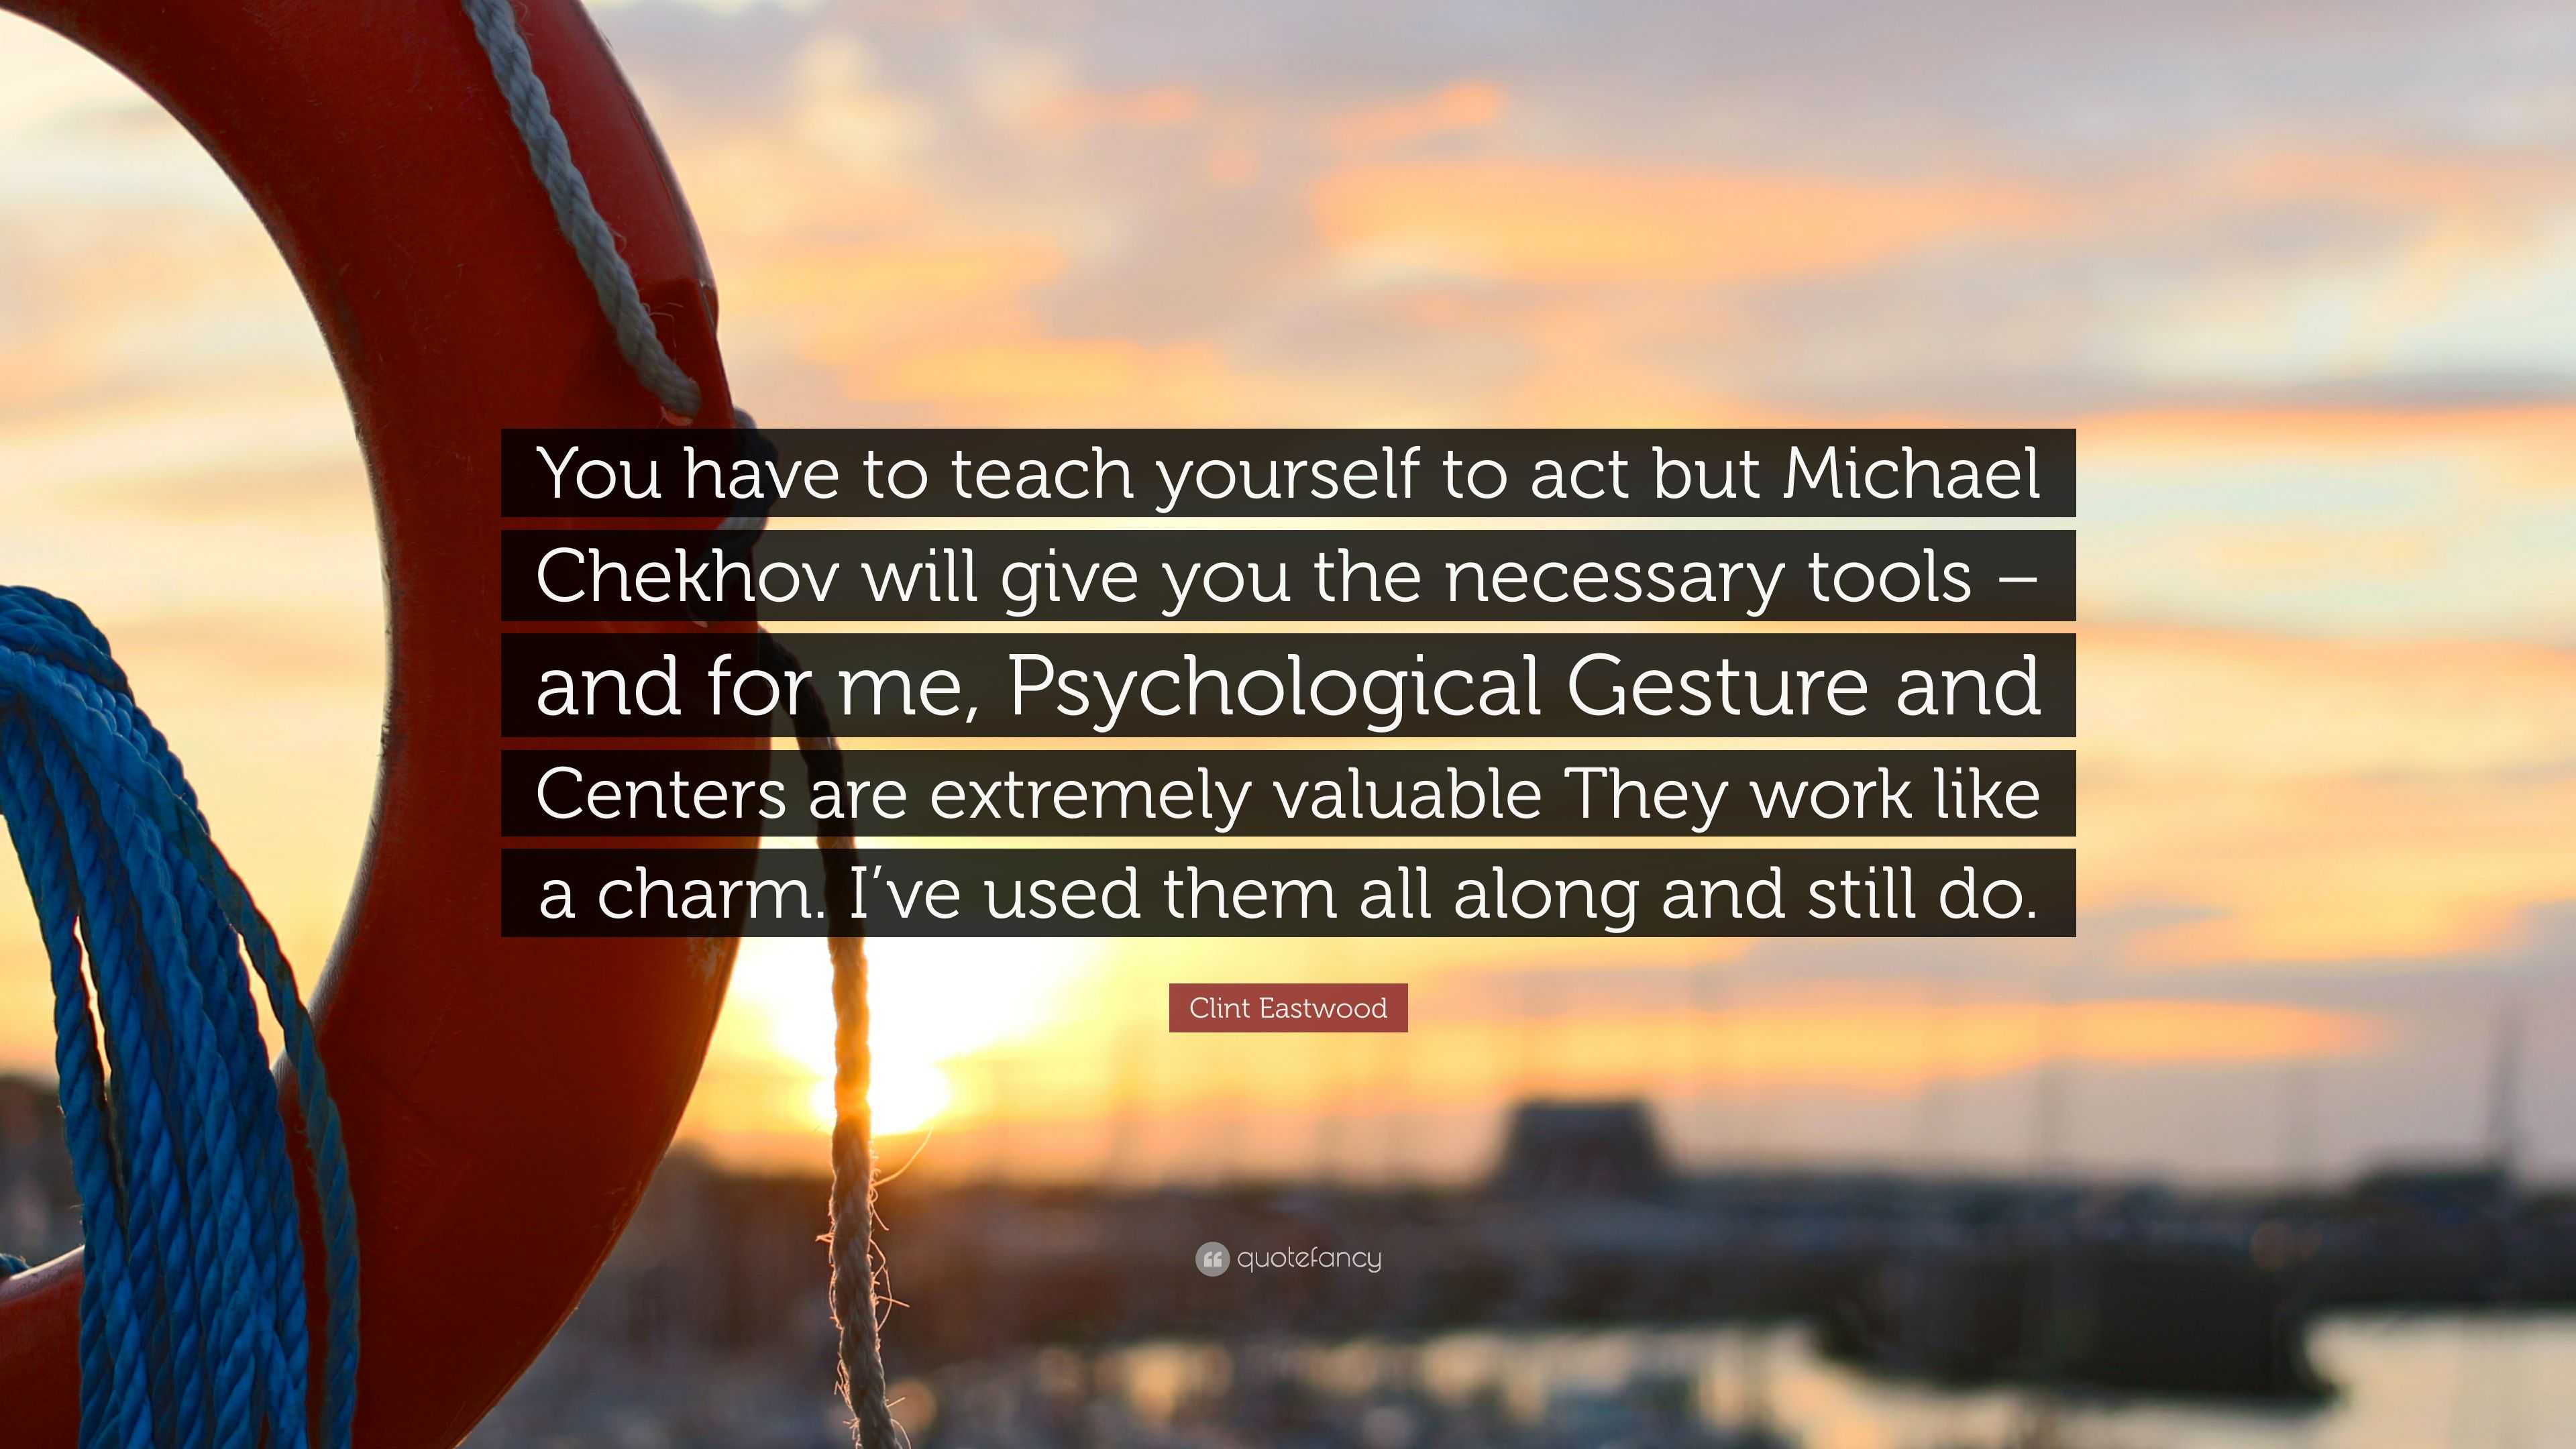 Clint Eastwood Quote: “You have to teach yourself to act but Michael ...